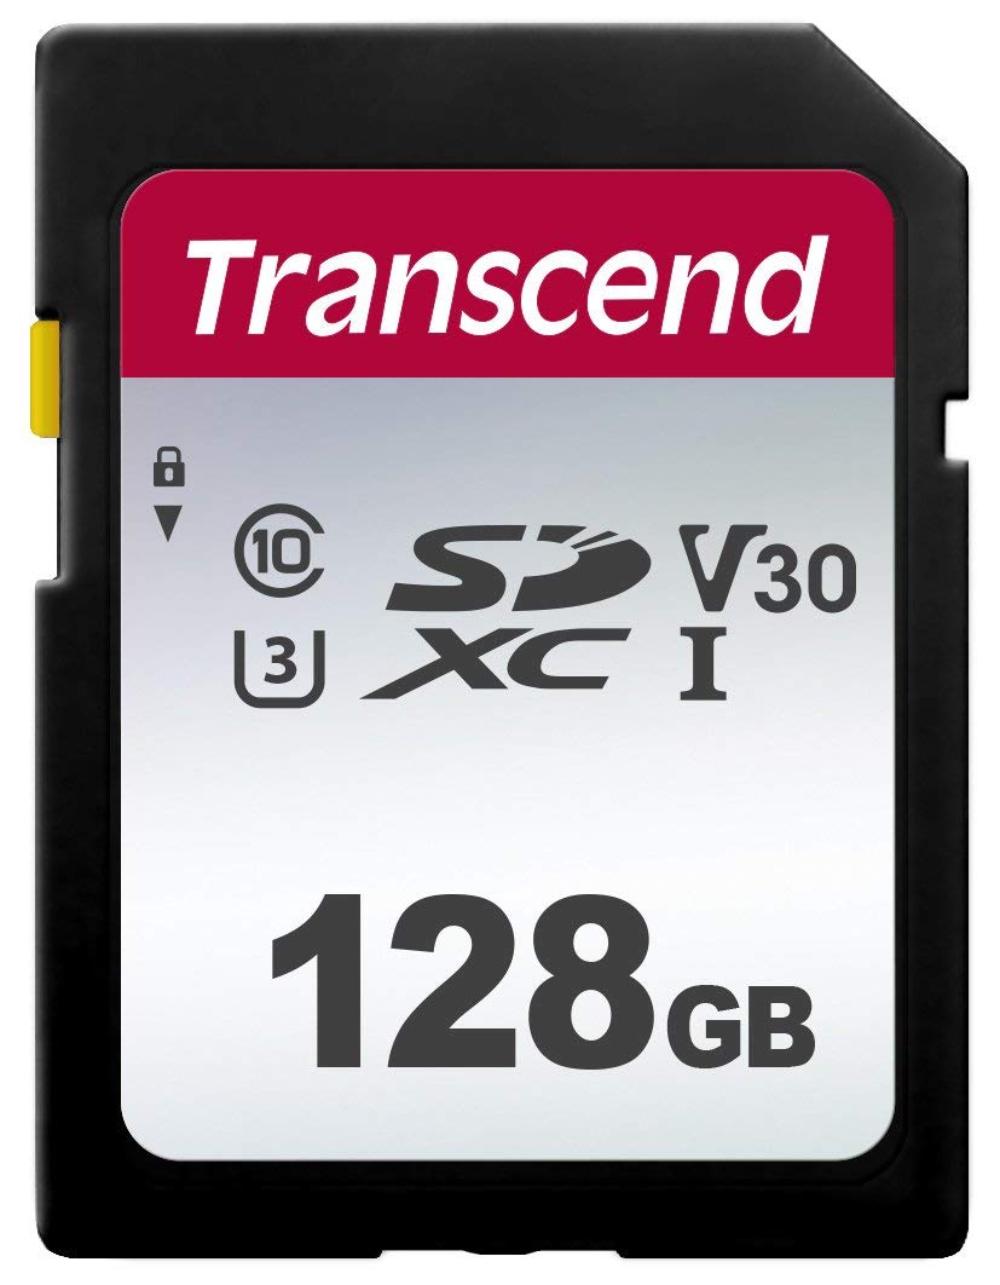 TS128GSDC300S 128GB UHS-I U3 SD Memory Card, Compliant with UHS Speed Class 3 (U3) and UHS Video Speed Class 30 (V30) standards By Transcend - image 1 of 1